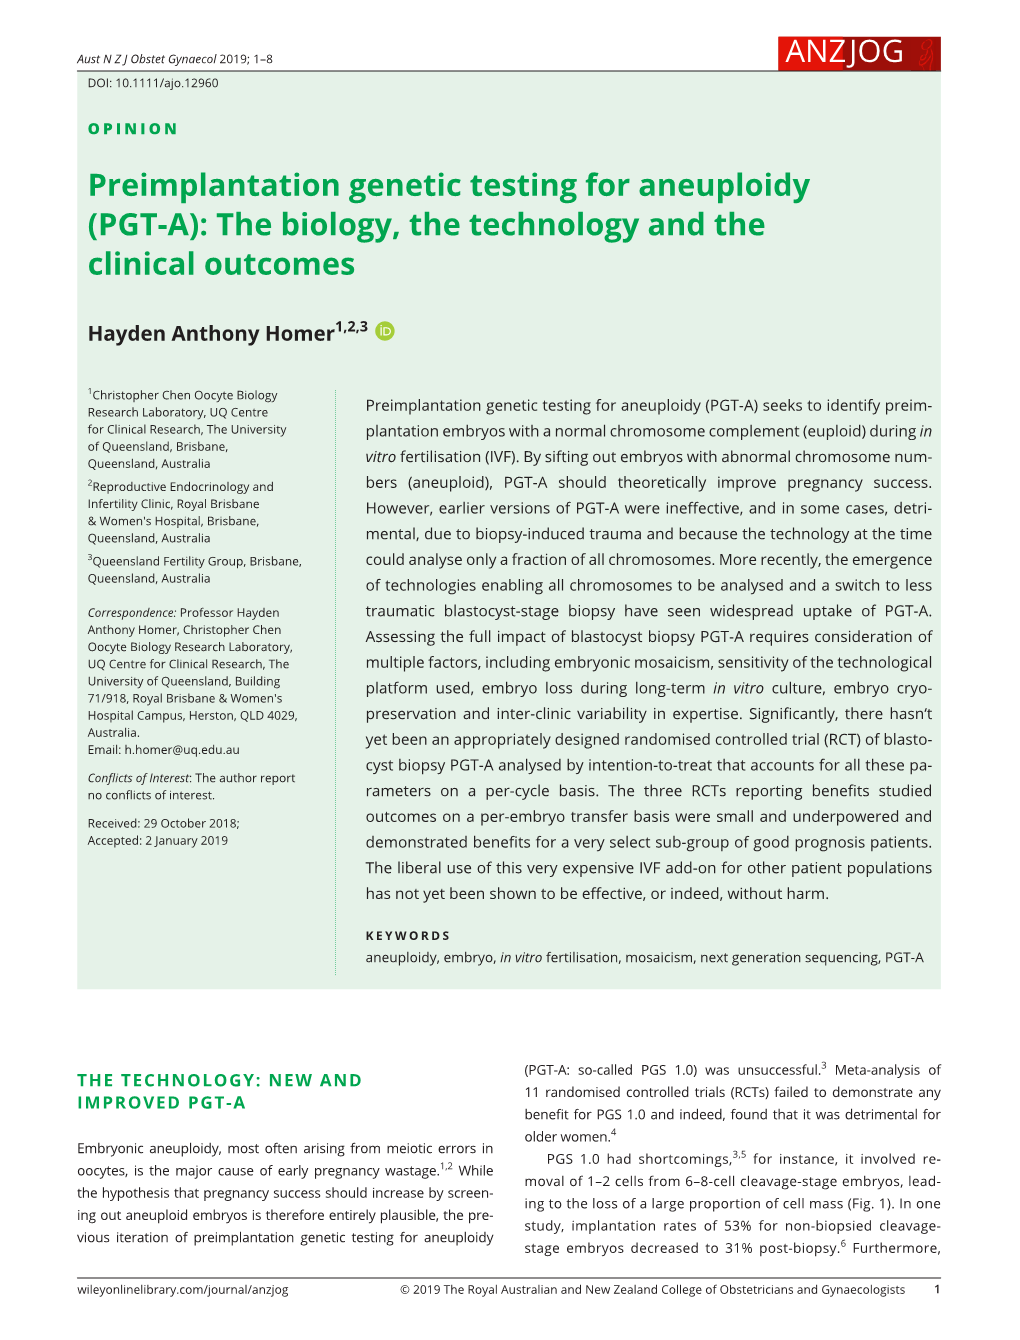 Preimplantation Genetic Testing for Aneuploidy (PGT-­A): the Biology, the Technology and the Clinical Outcomes